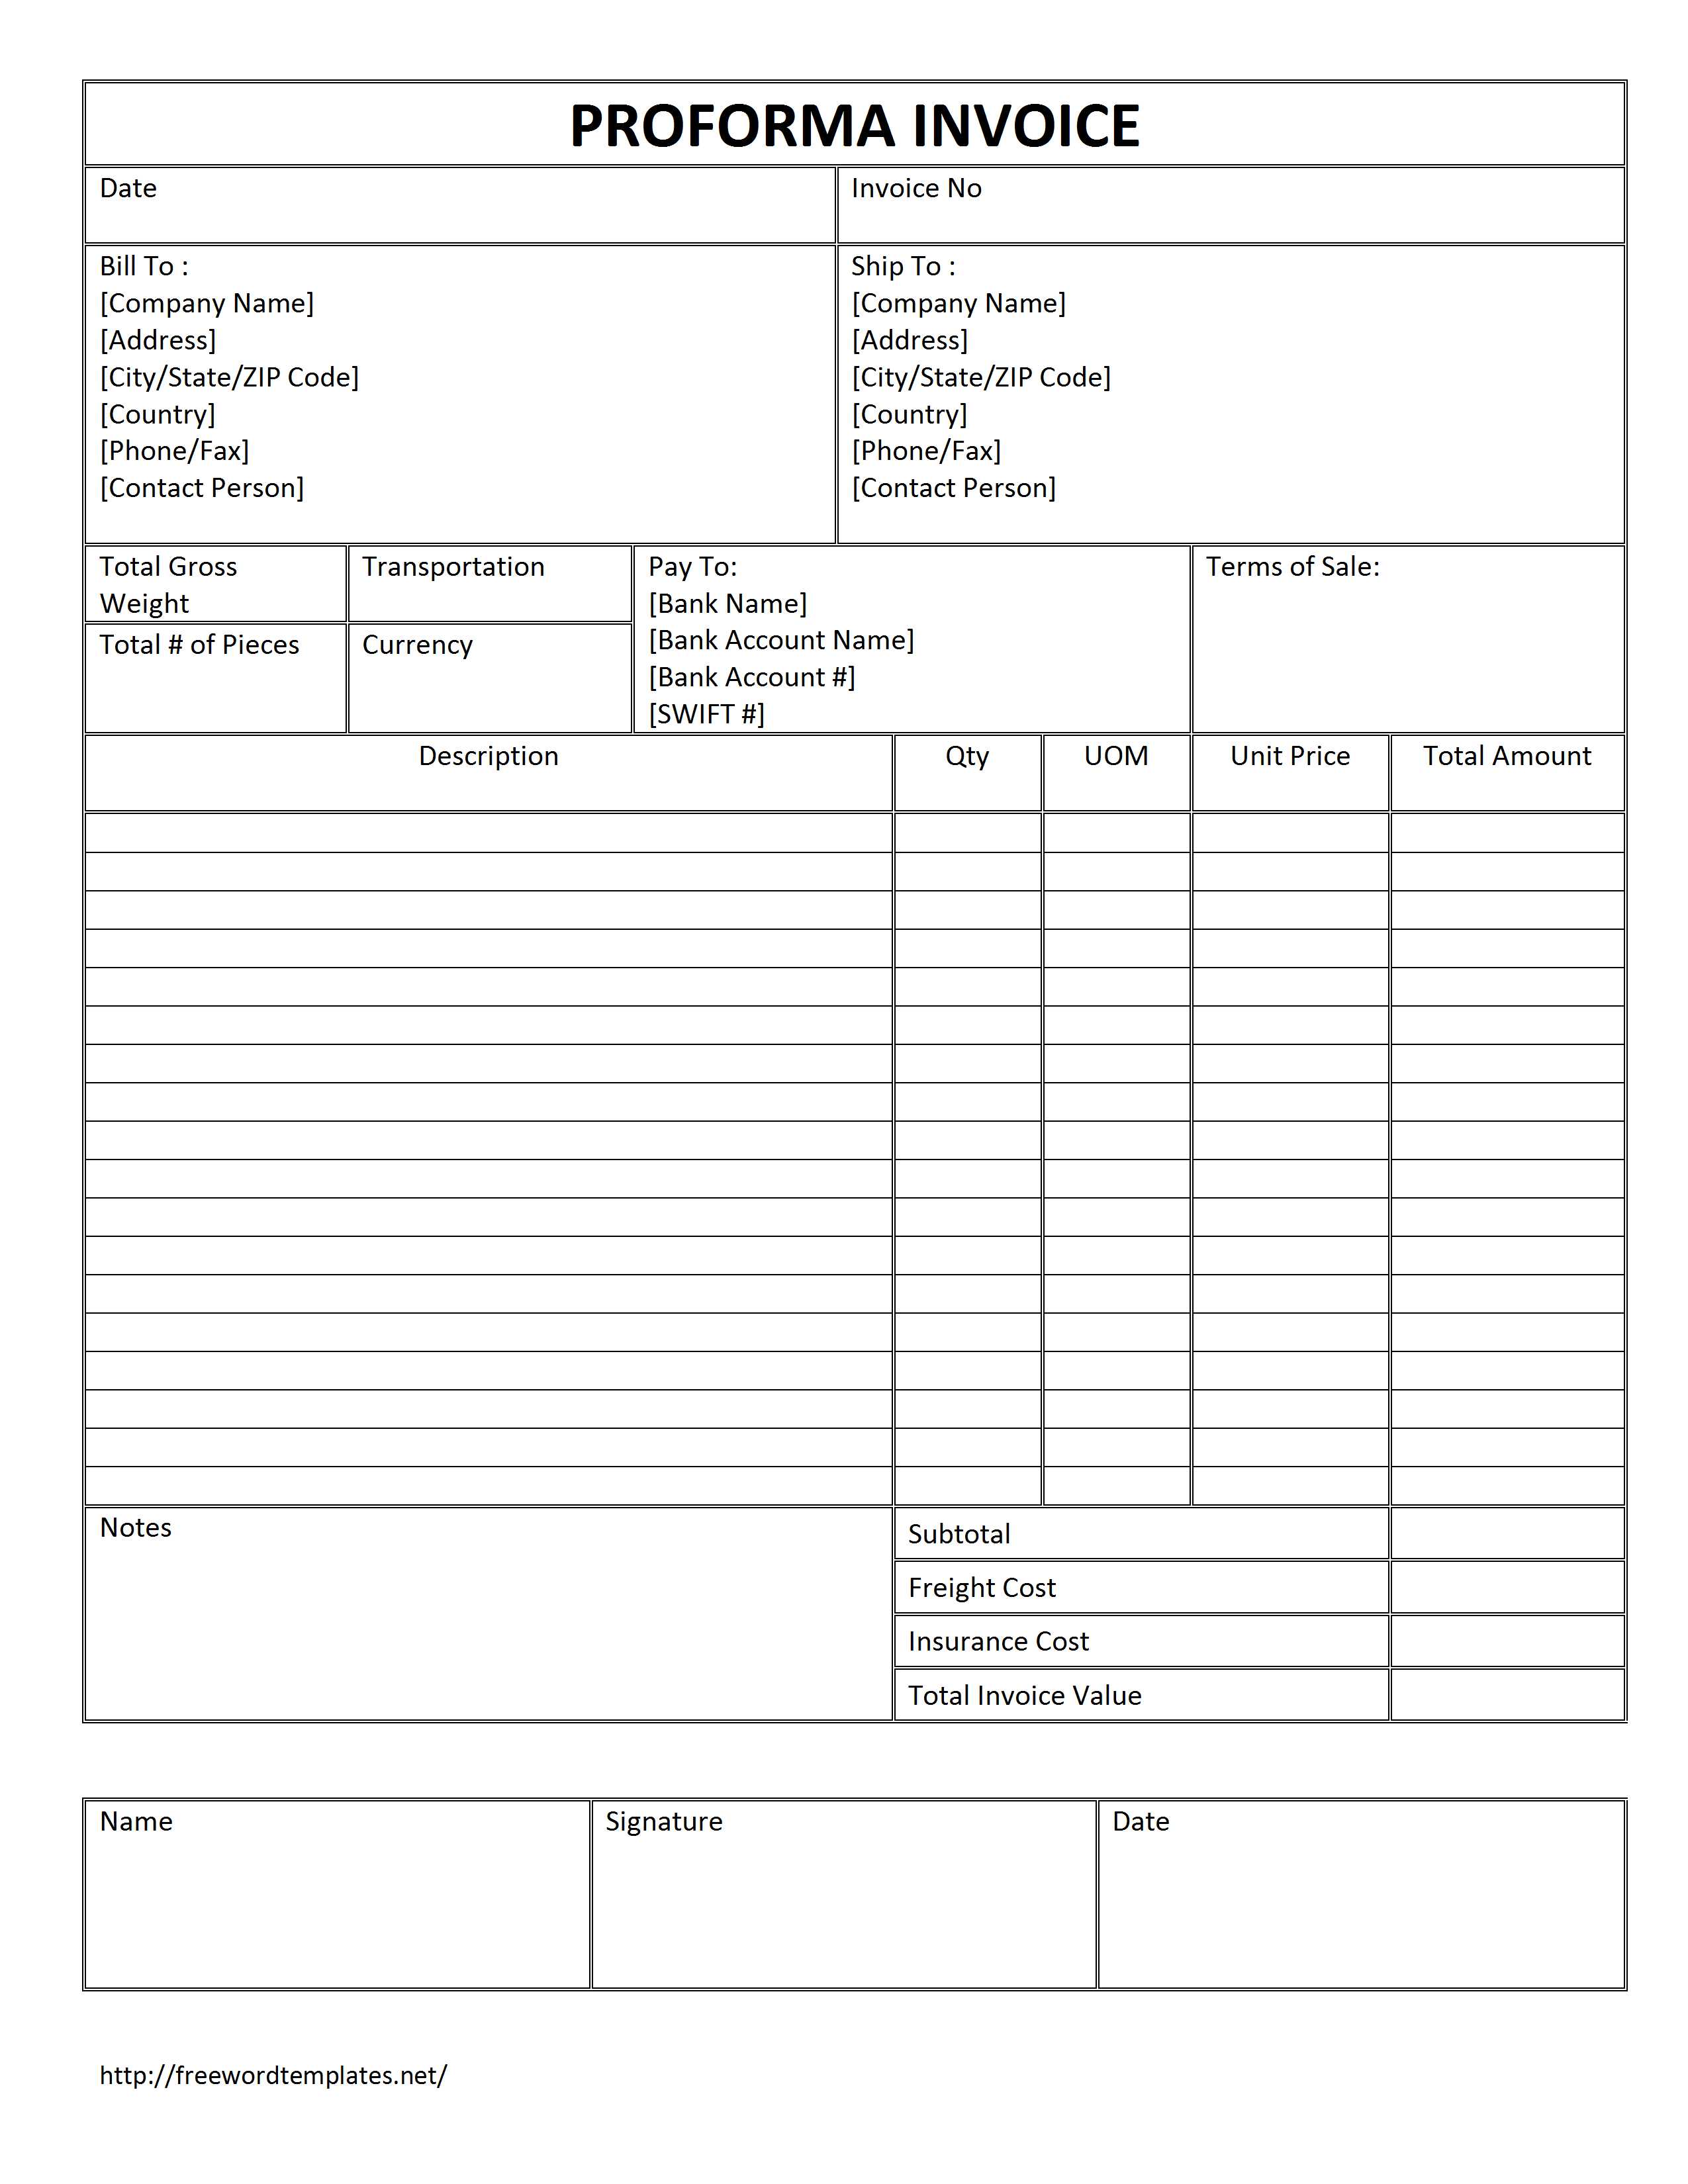 cbp commercial invoice template For Free Proforma Invoice Template Word